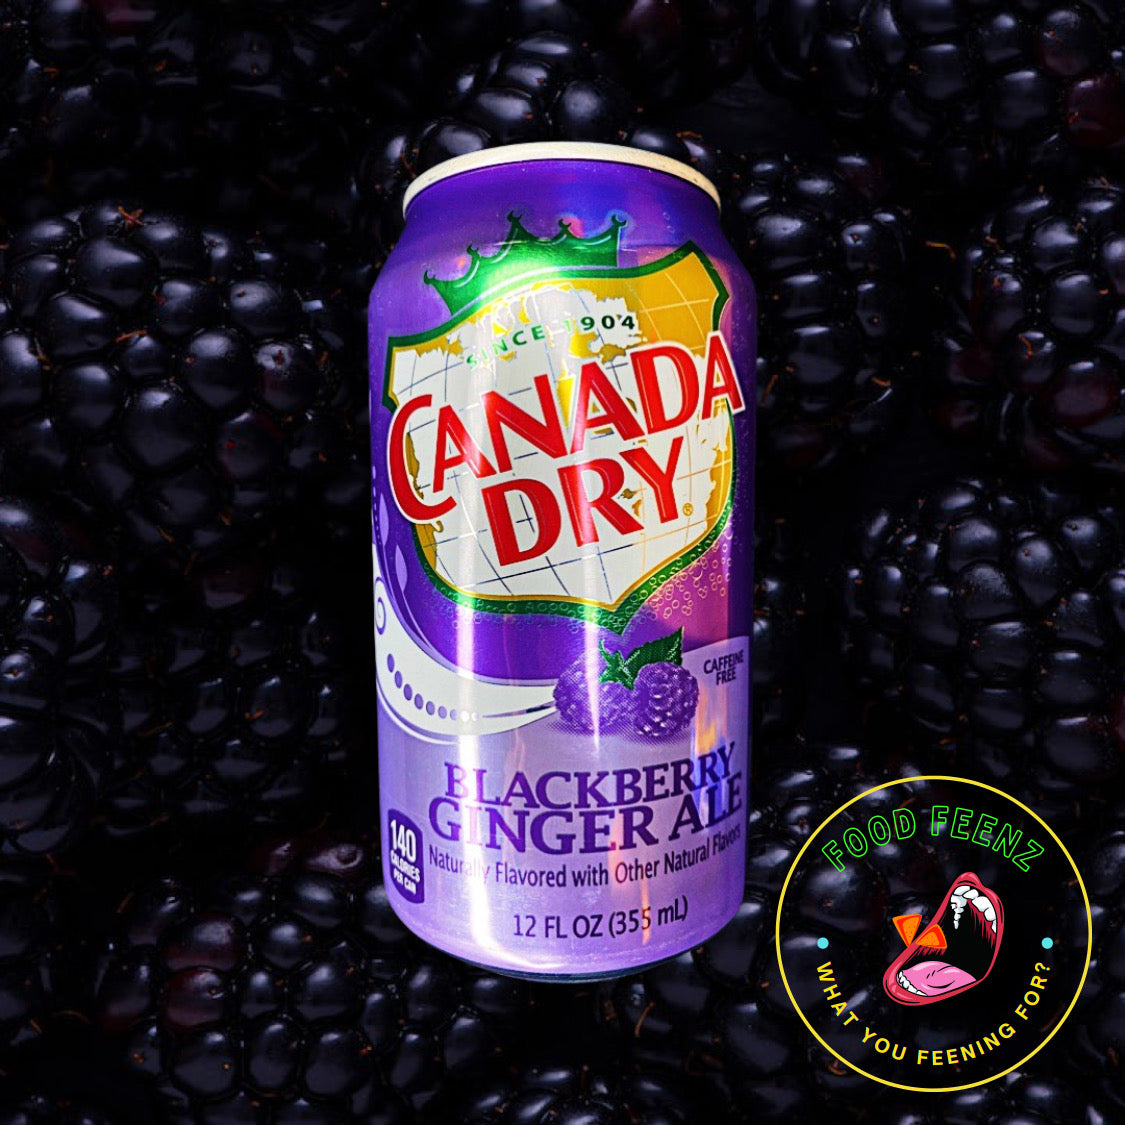 Canada Dry Black Berry Ginger Ale